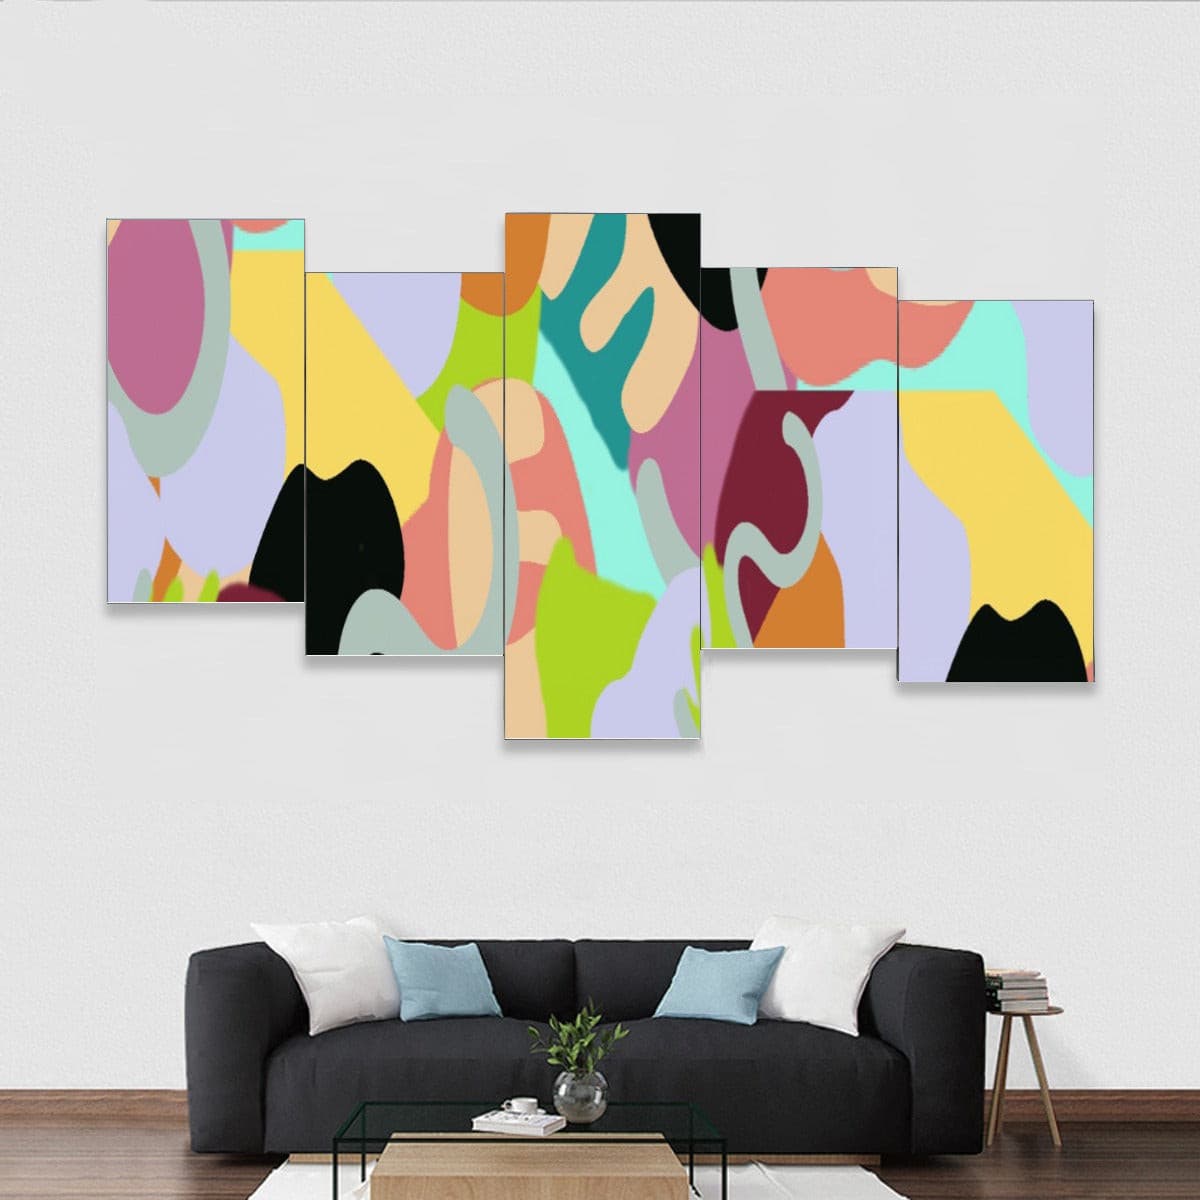 M MULTI-COLORED - Abstract Wild Framed Five-Piece Mural - Wall art at TFC&H Co.